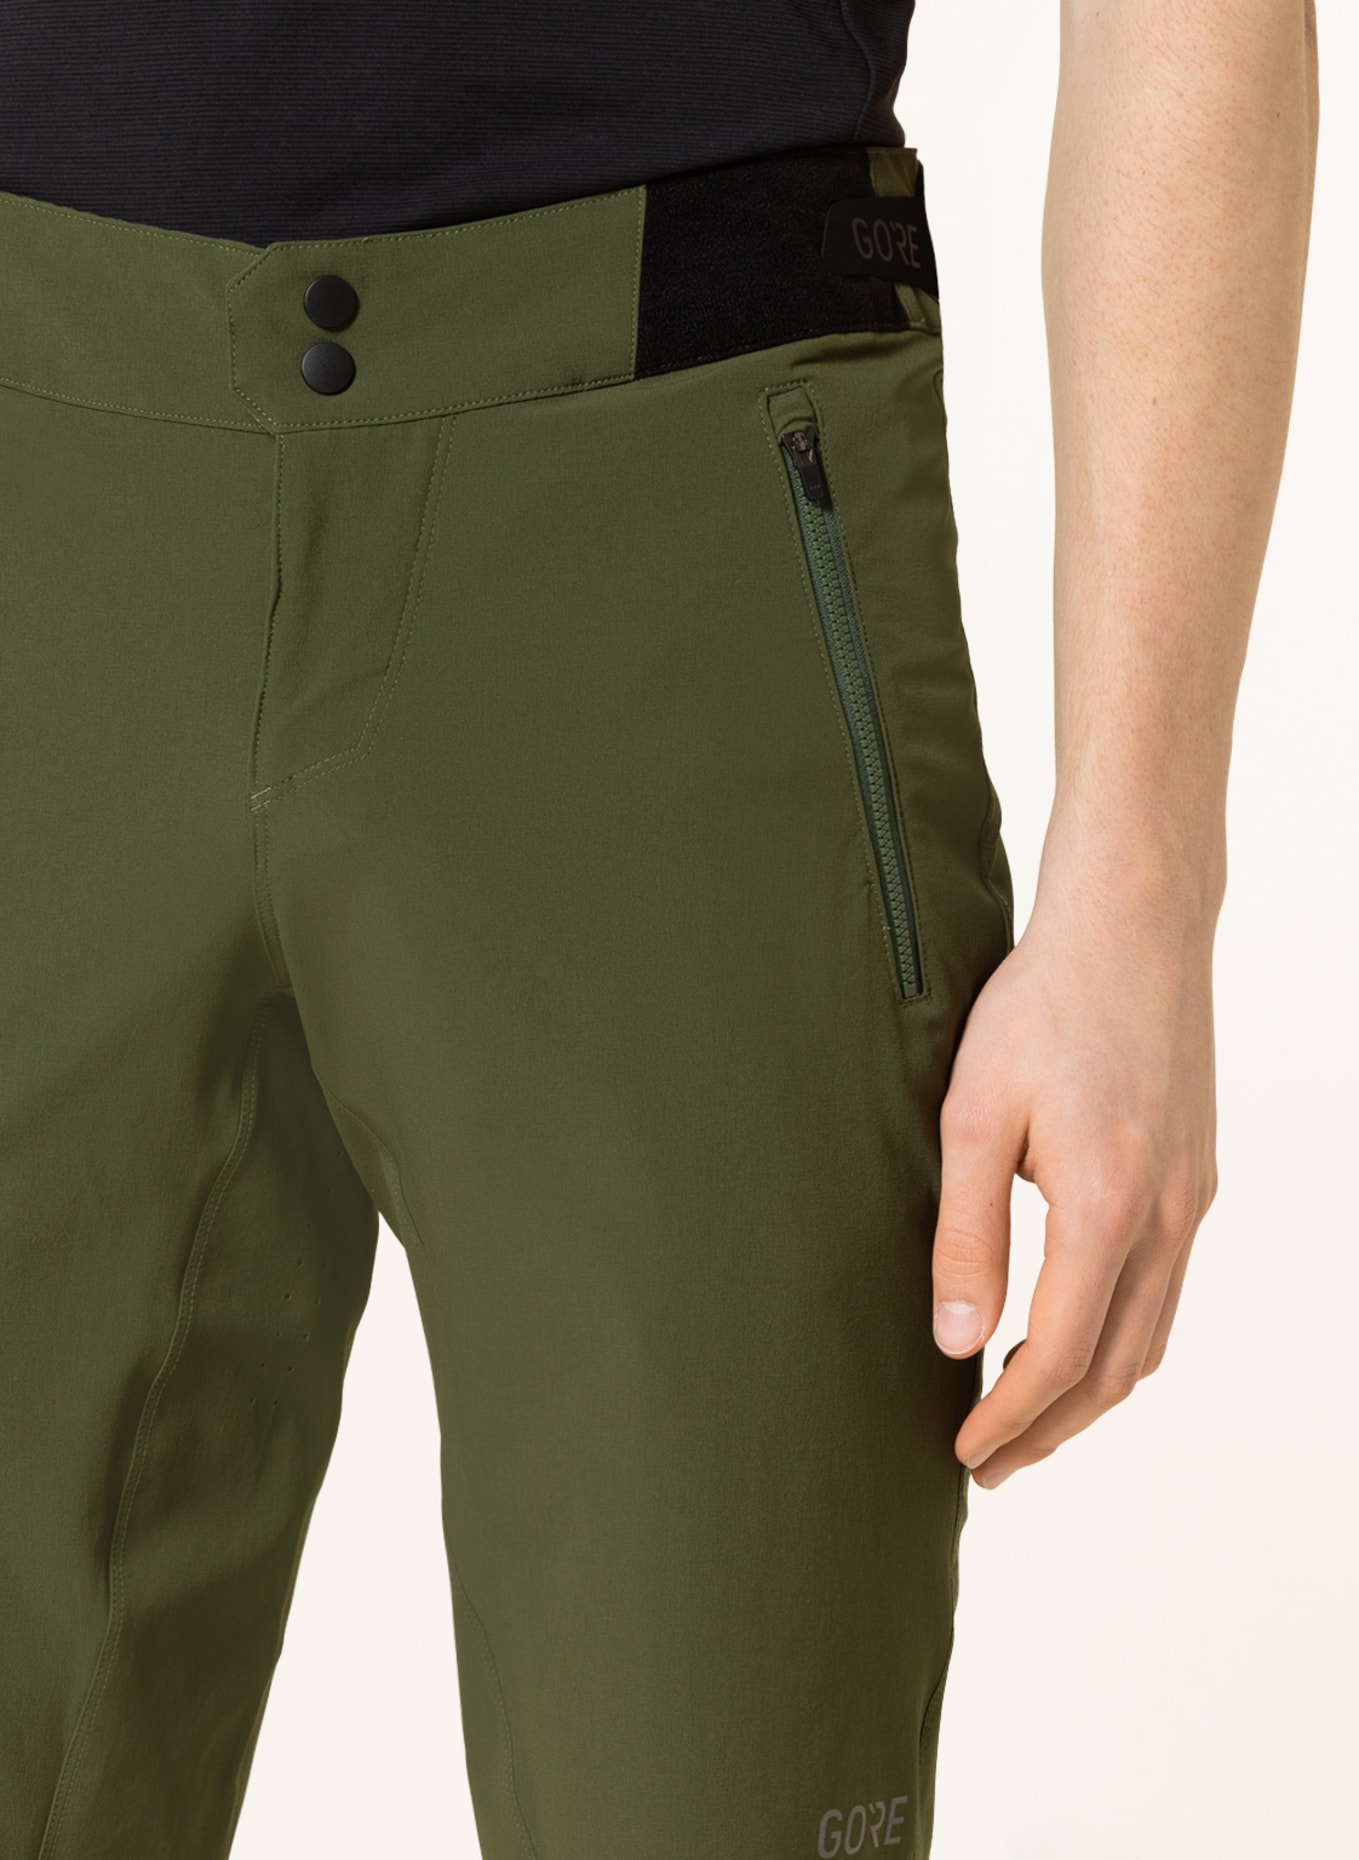 GORE BIKE WEAR Cycling shorts C5 without padded insert, Color: KHAKI (Image 5)